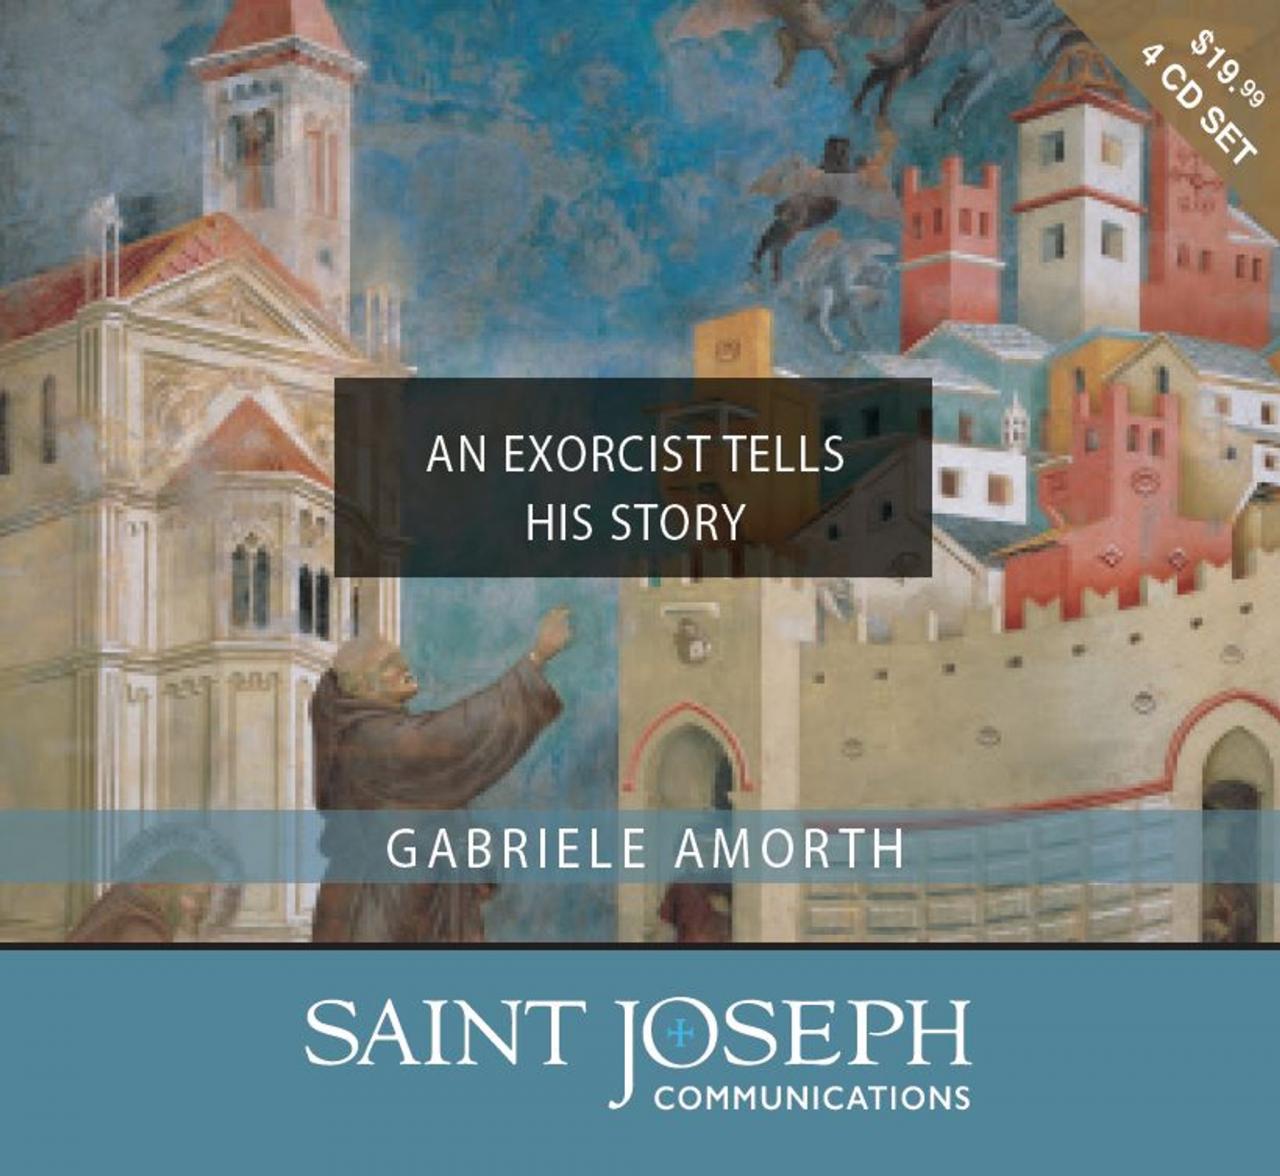 An exorcist tells his story book